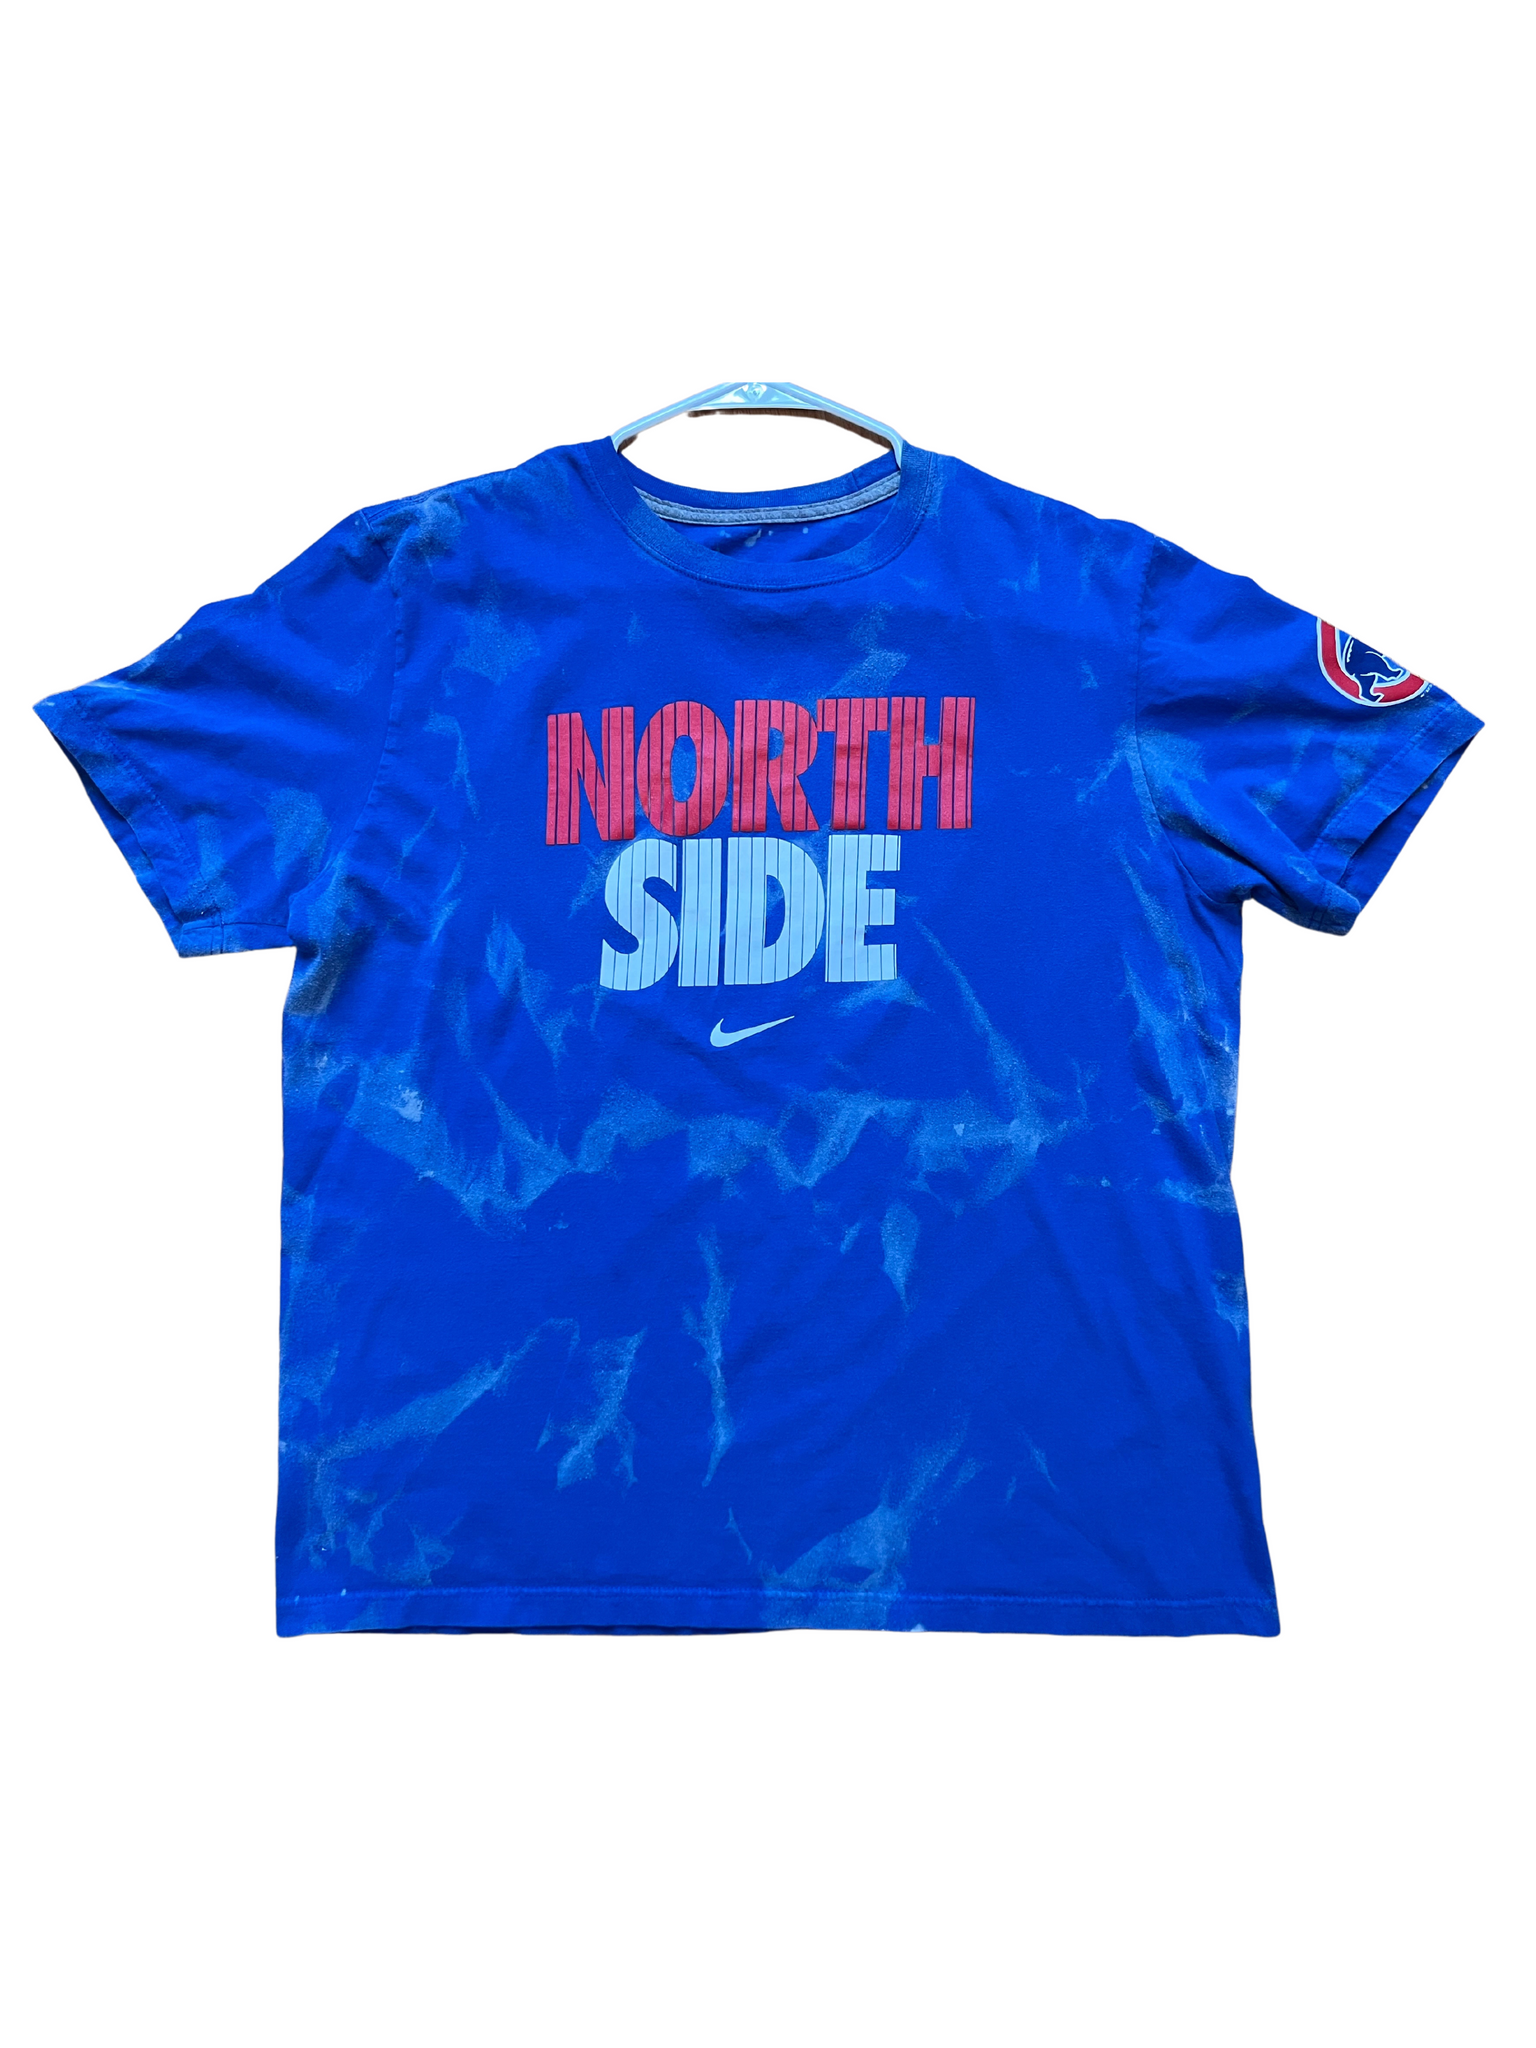 Chicago Cubs “North Side” Bleached Shirt